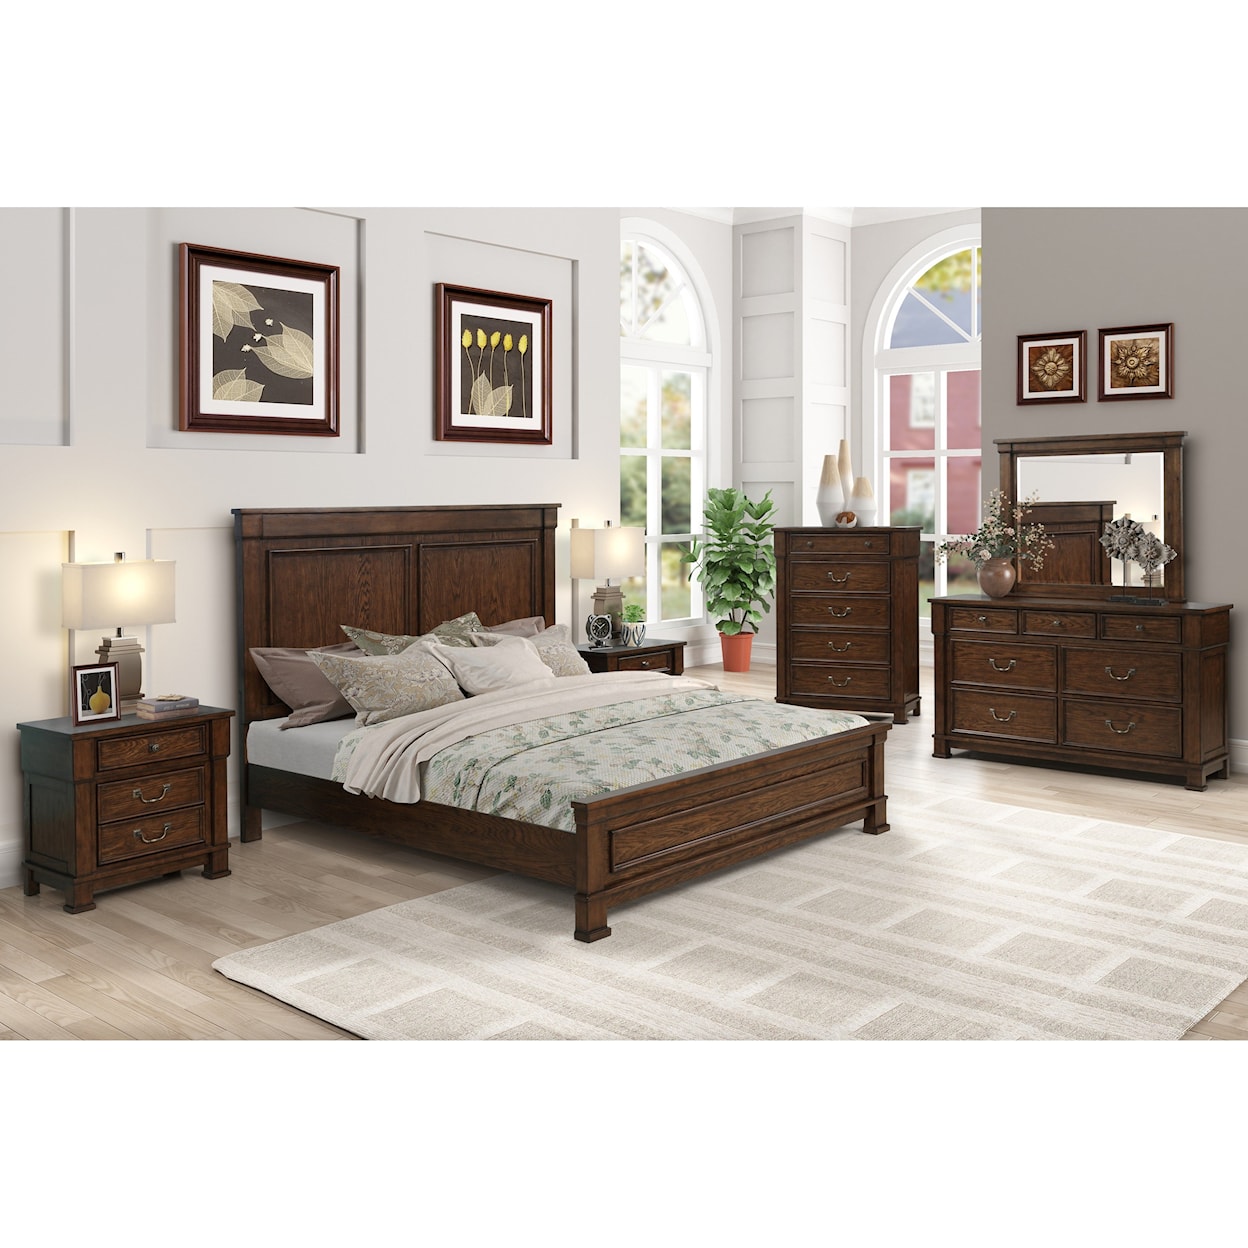 New Classic Furniture Providence King Bedroom Group 